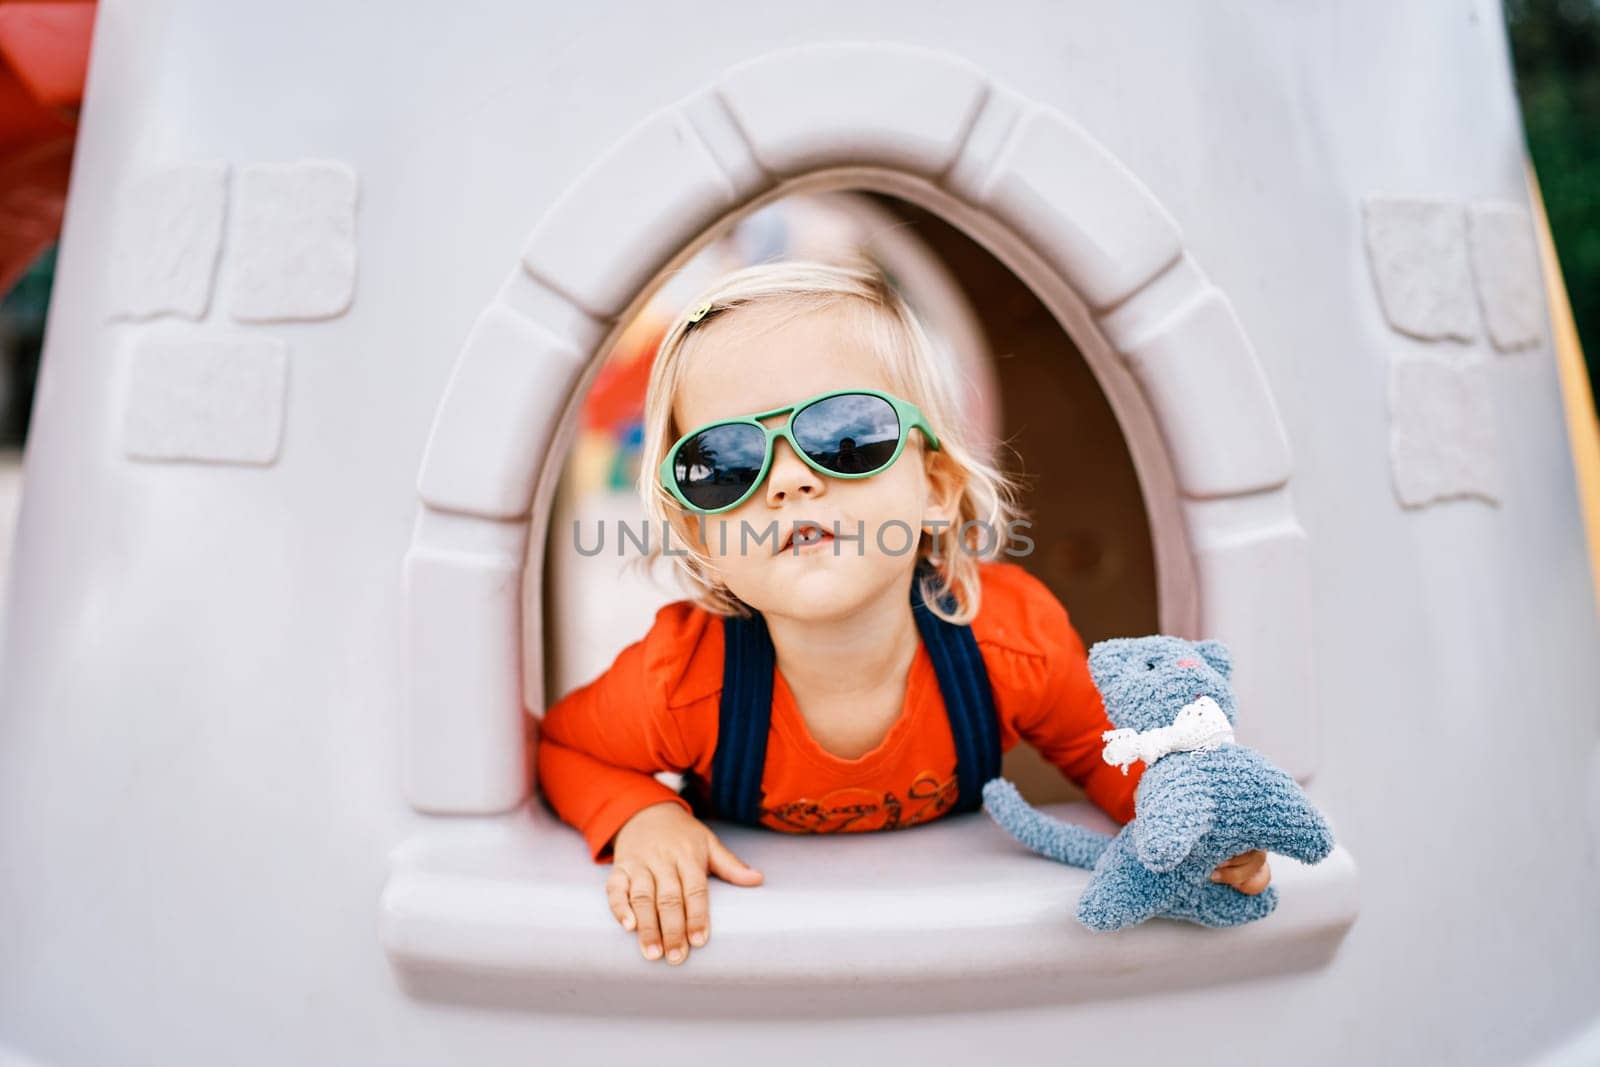 Little girl in sunglasses with a toy in her hand looks out of the window of a toy castle on the playground by Nadtochiy